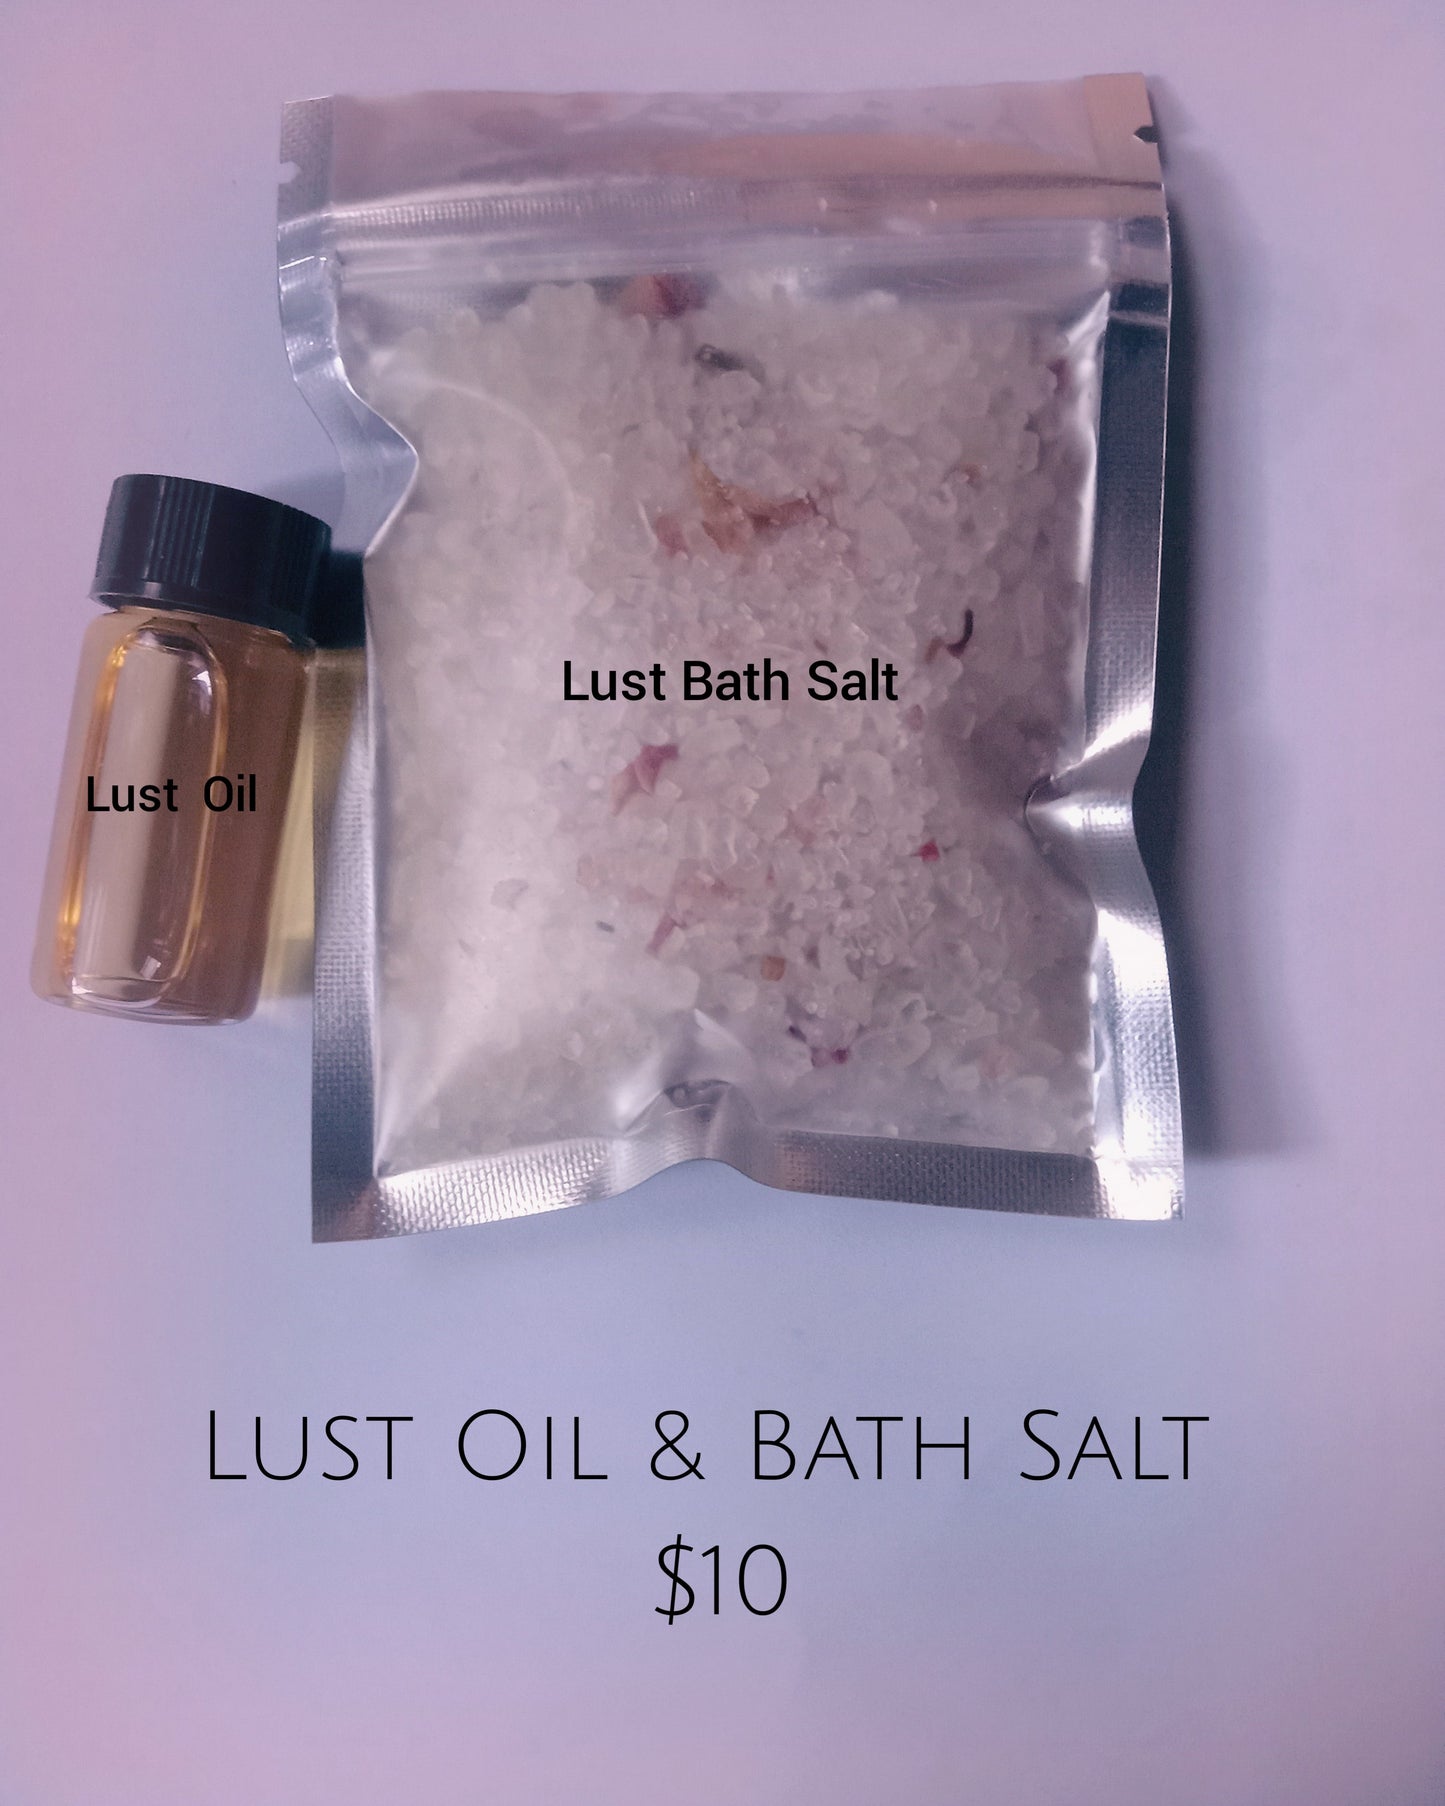  Lust Oil & Bath Salt -  available at Amazing Creations Products . Grab yours for $10 today!